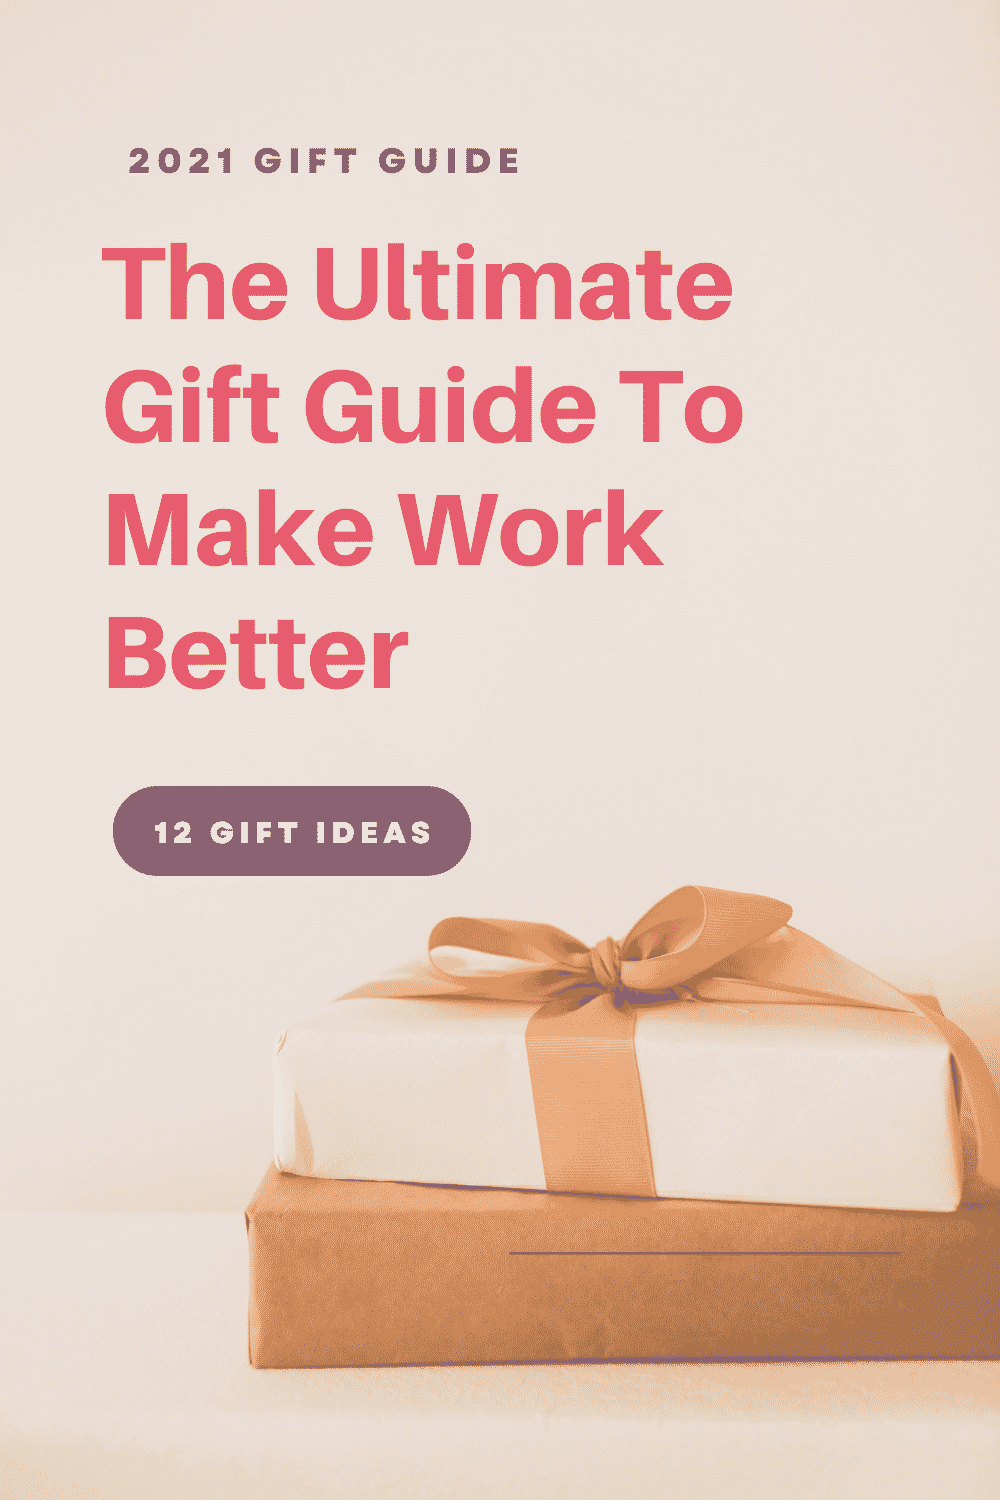 The Ultimate Gift Guide to Make Work Better